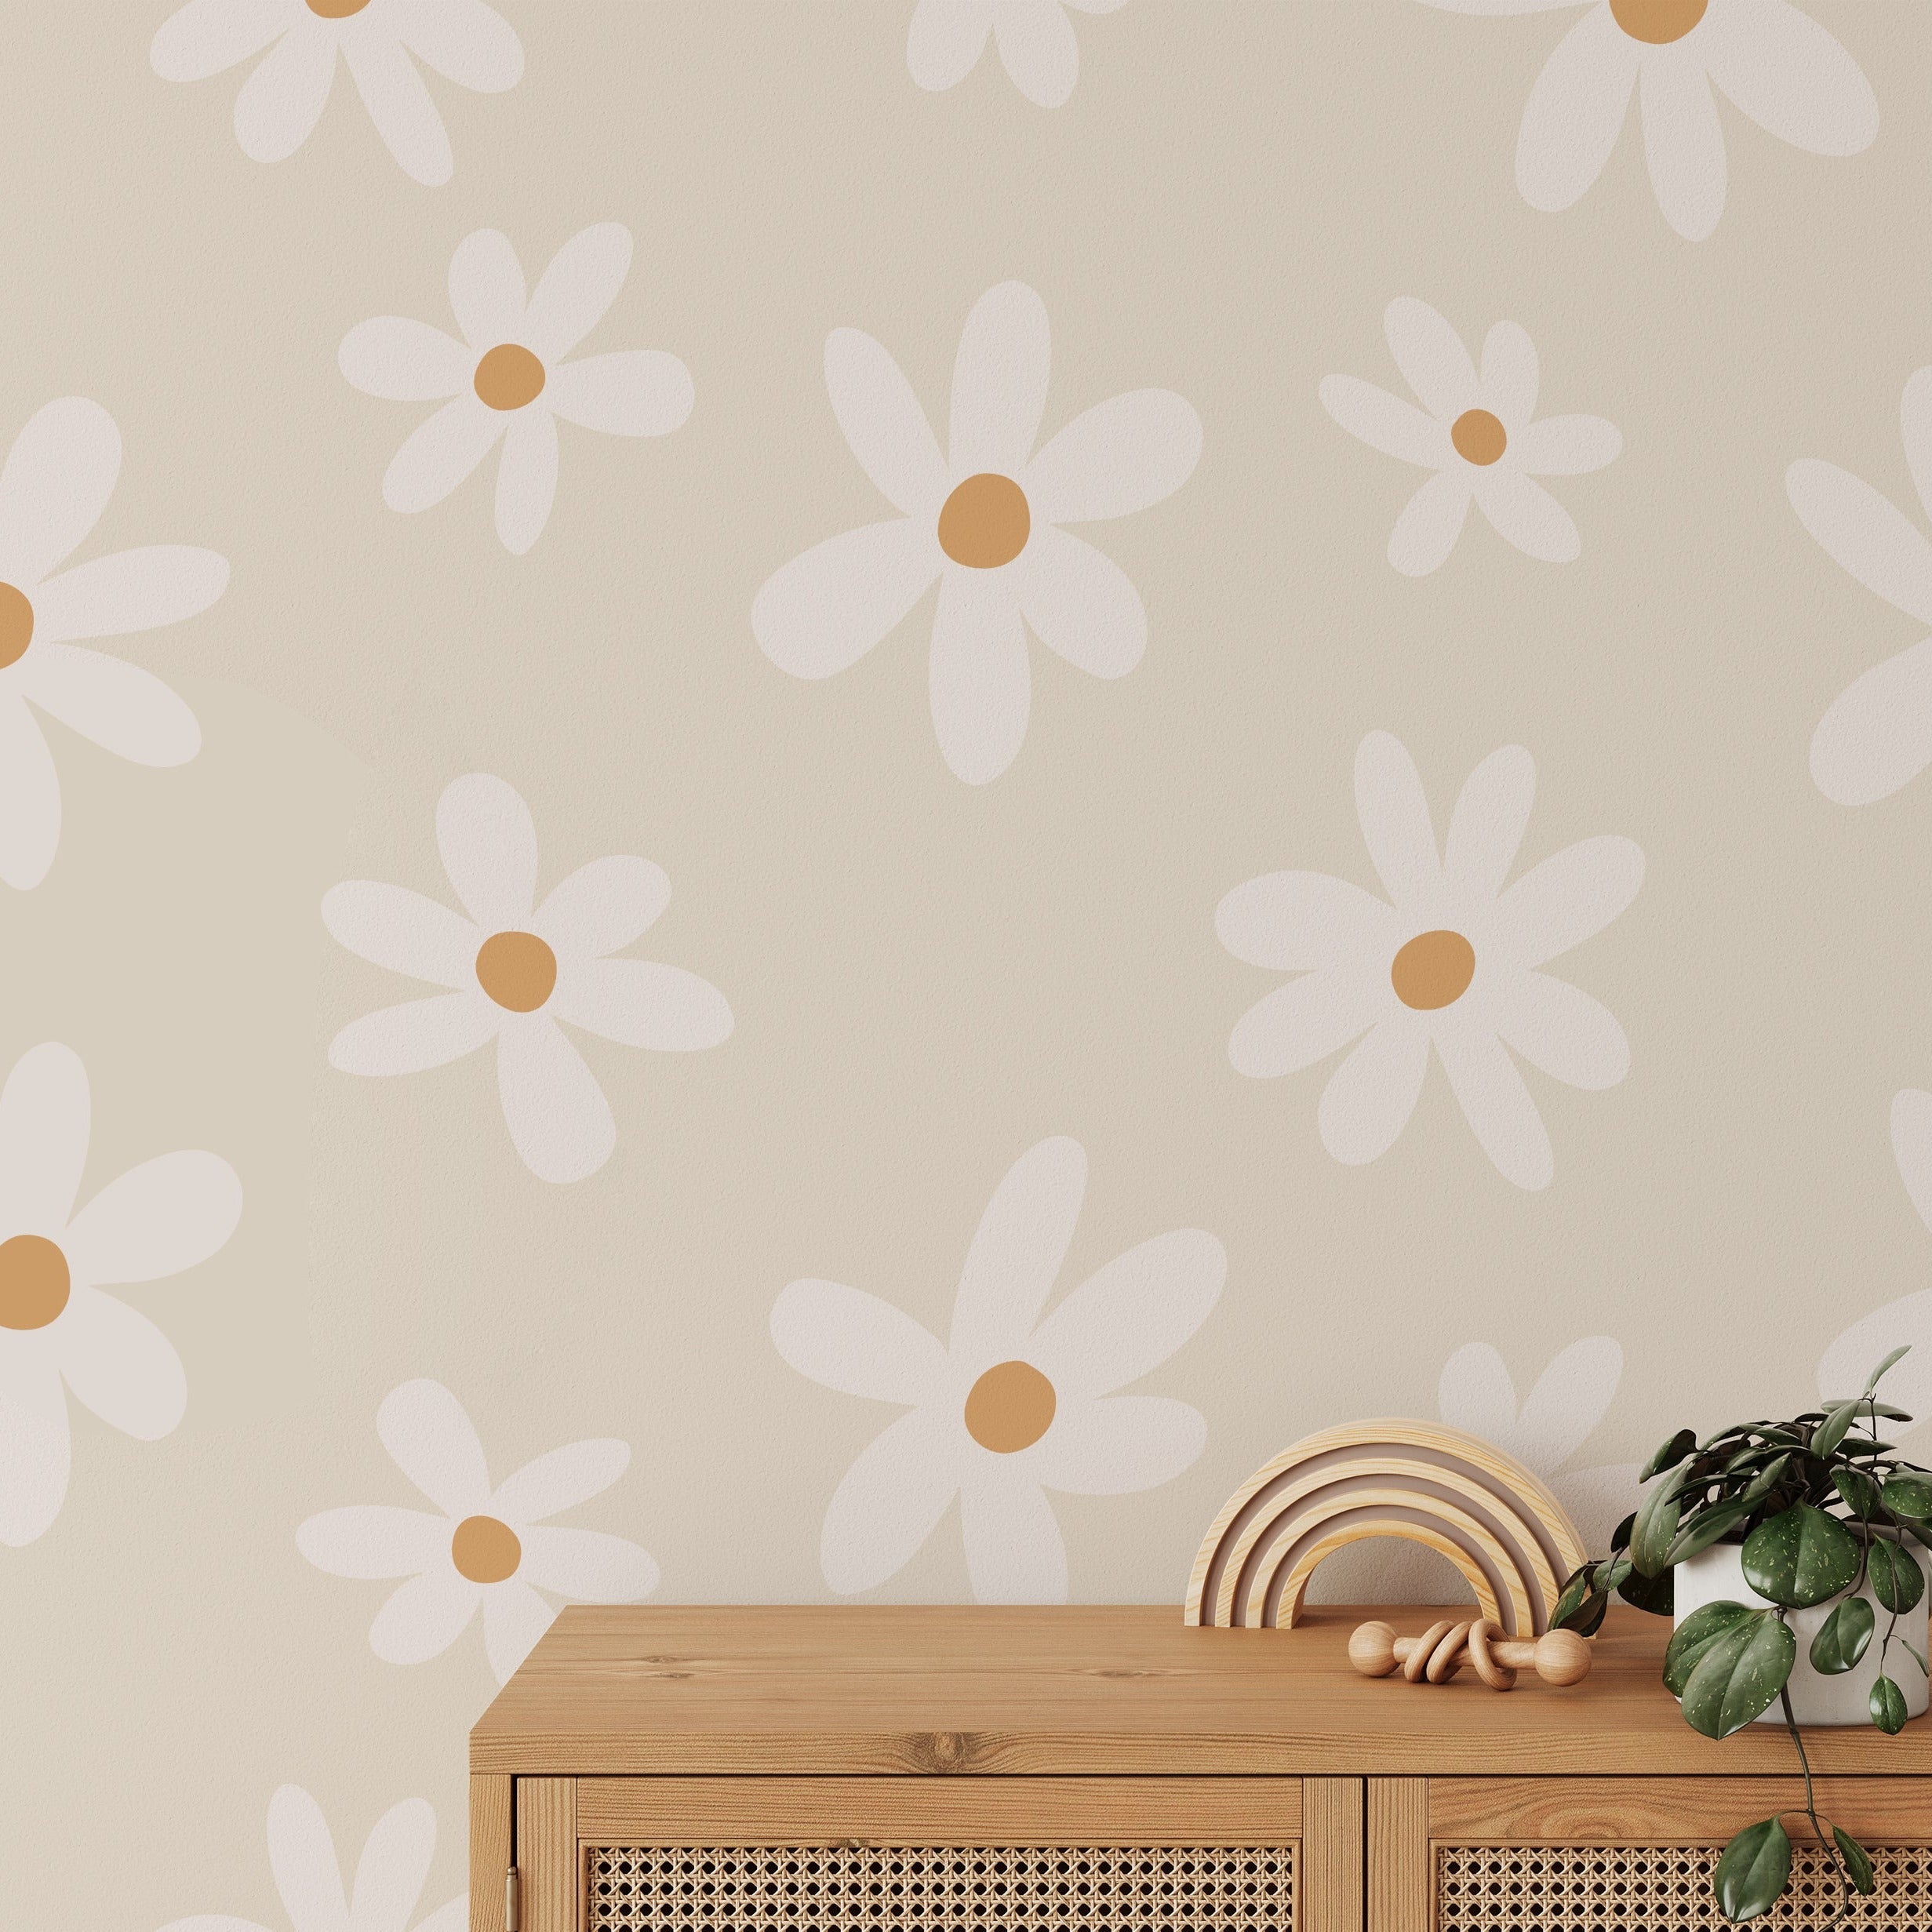 A warm and welcoming interior featuring the Simple Daisy Wallpaper, with its pattern of large, white daisies on an ecru background enhancing the room's natural light and complementing the wooden decor and green houseplants